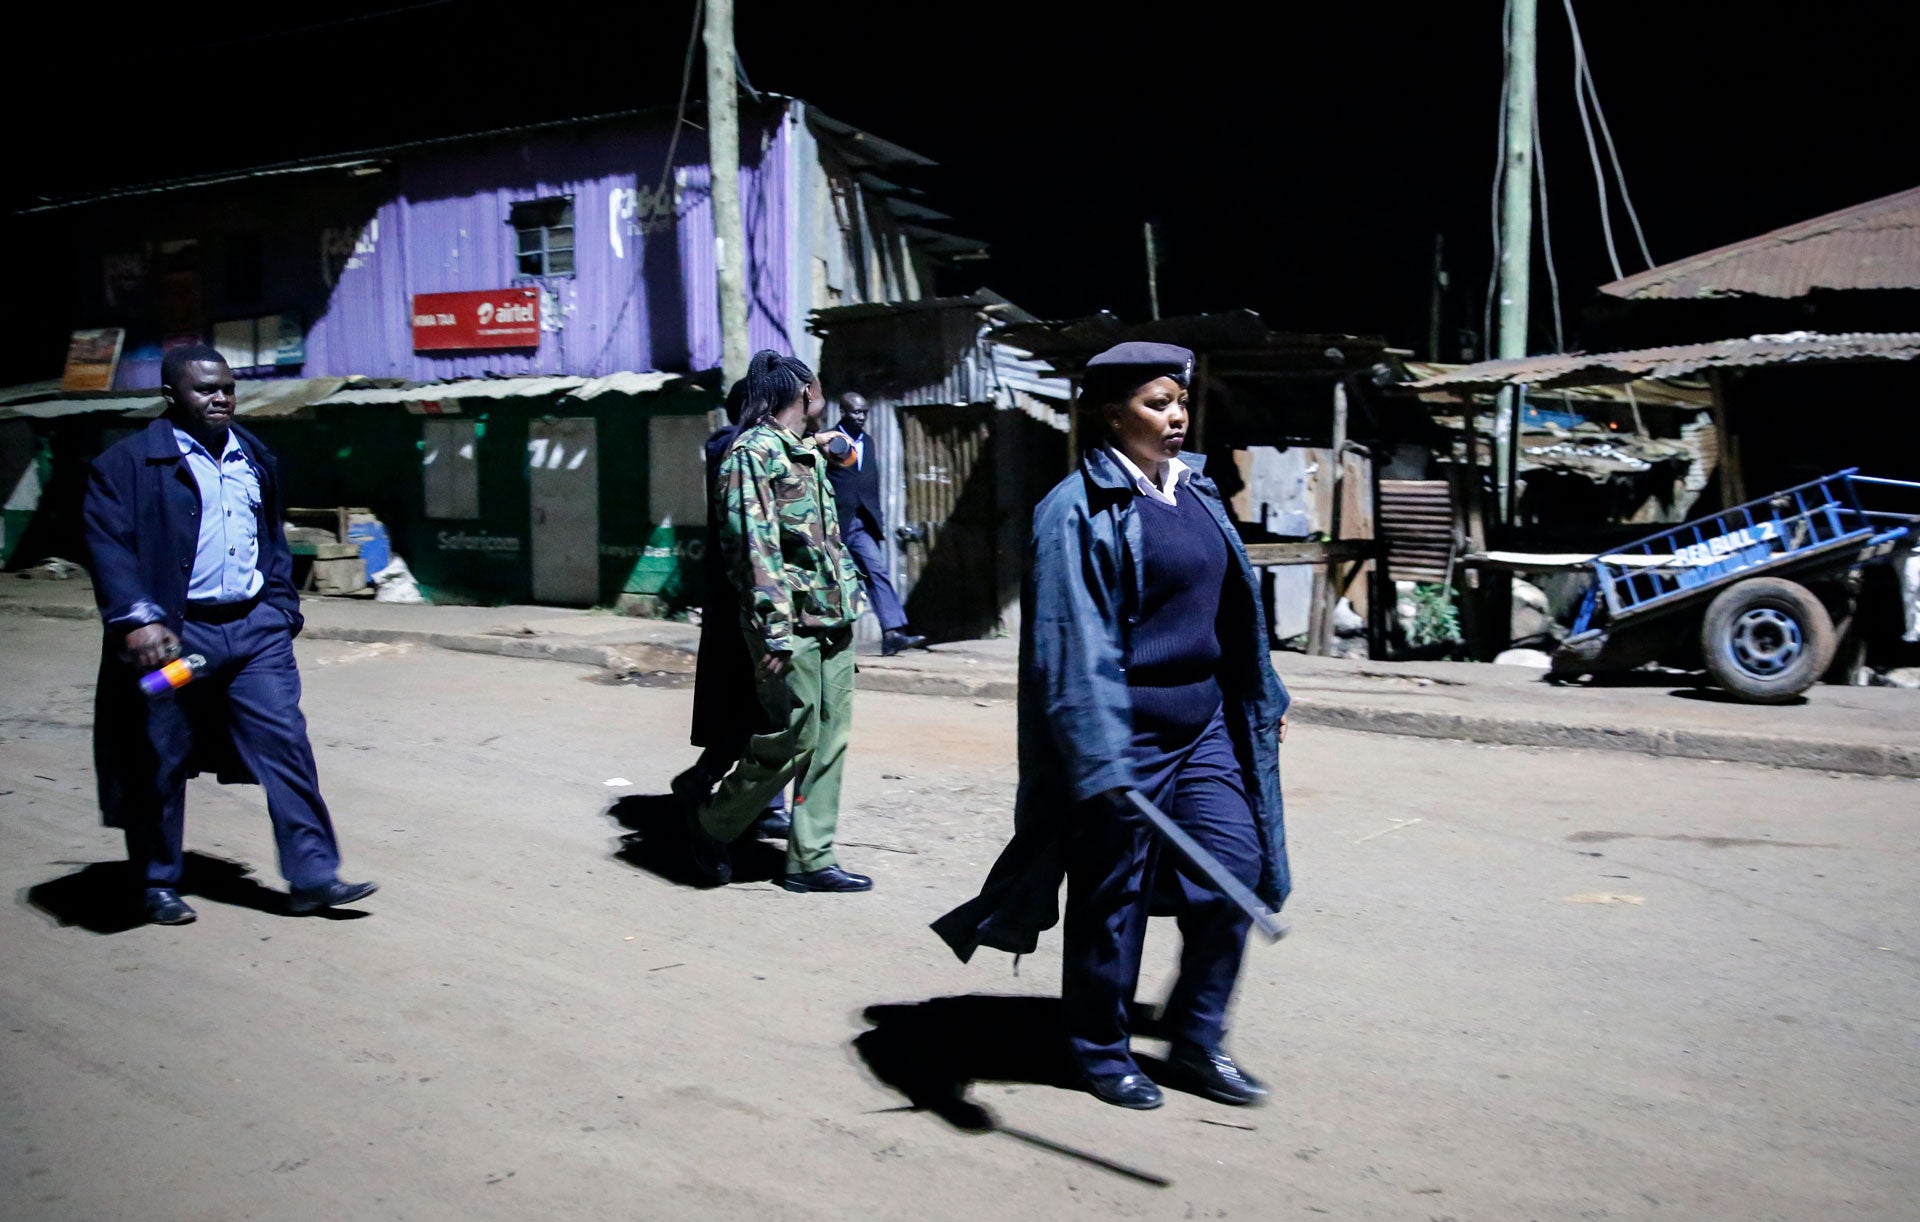 Kenyan police carrying batons and teargas patrol looking for people out after curfew in the Kibera slum, or informal settlement, of Nairobi, Kenya, March 29, 2020.